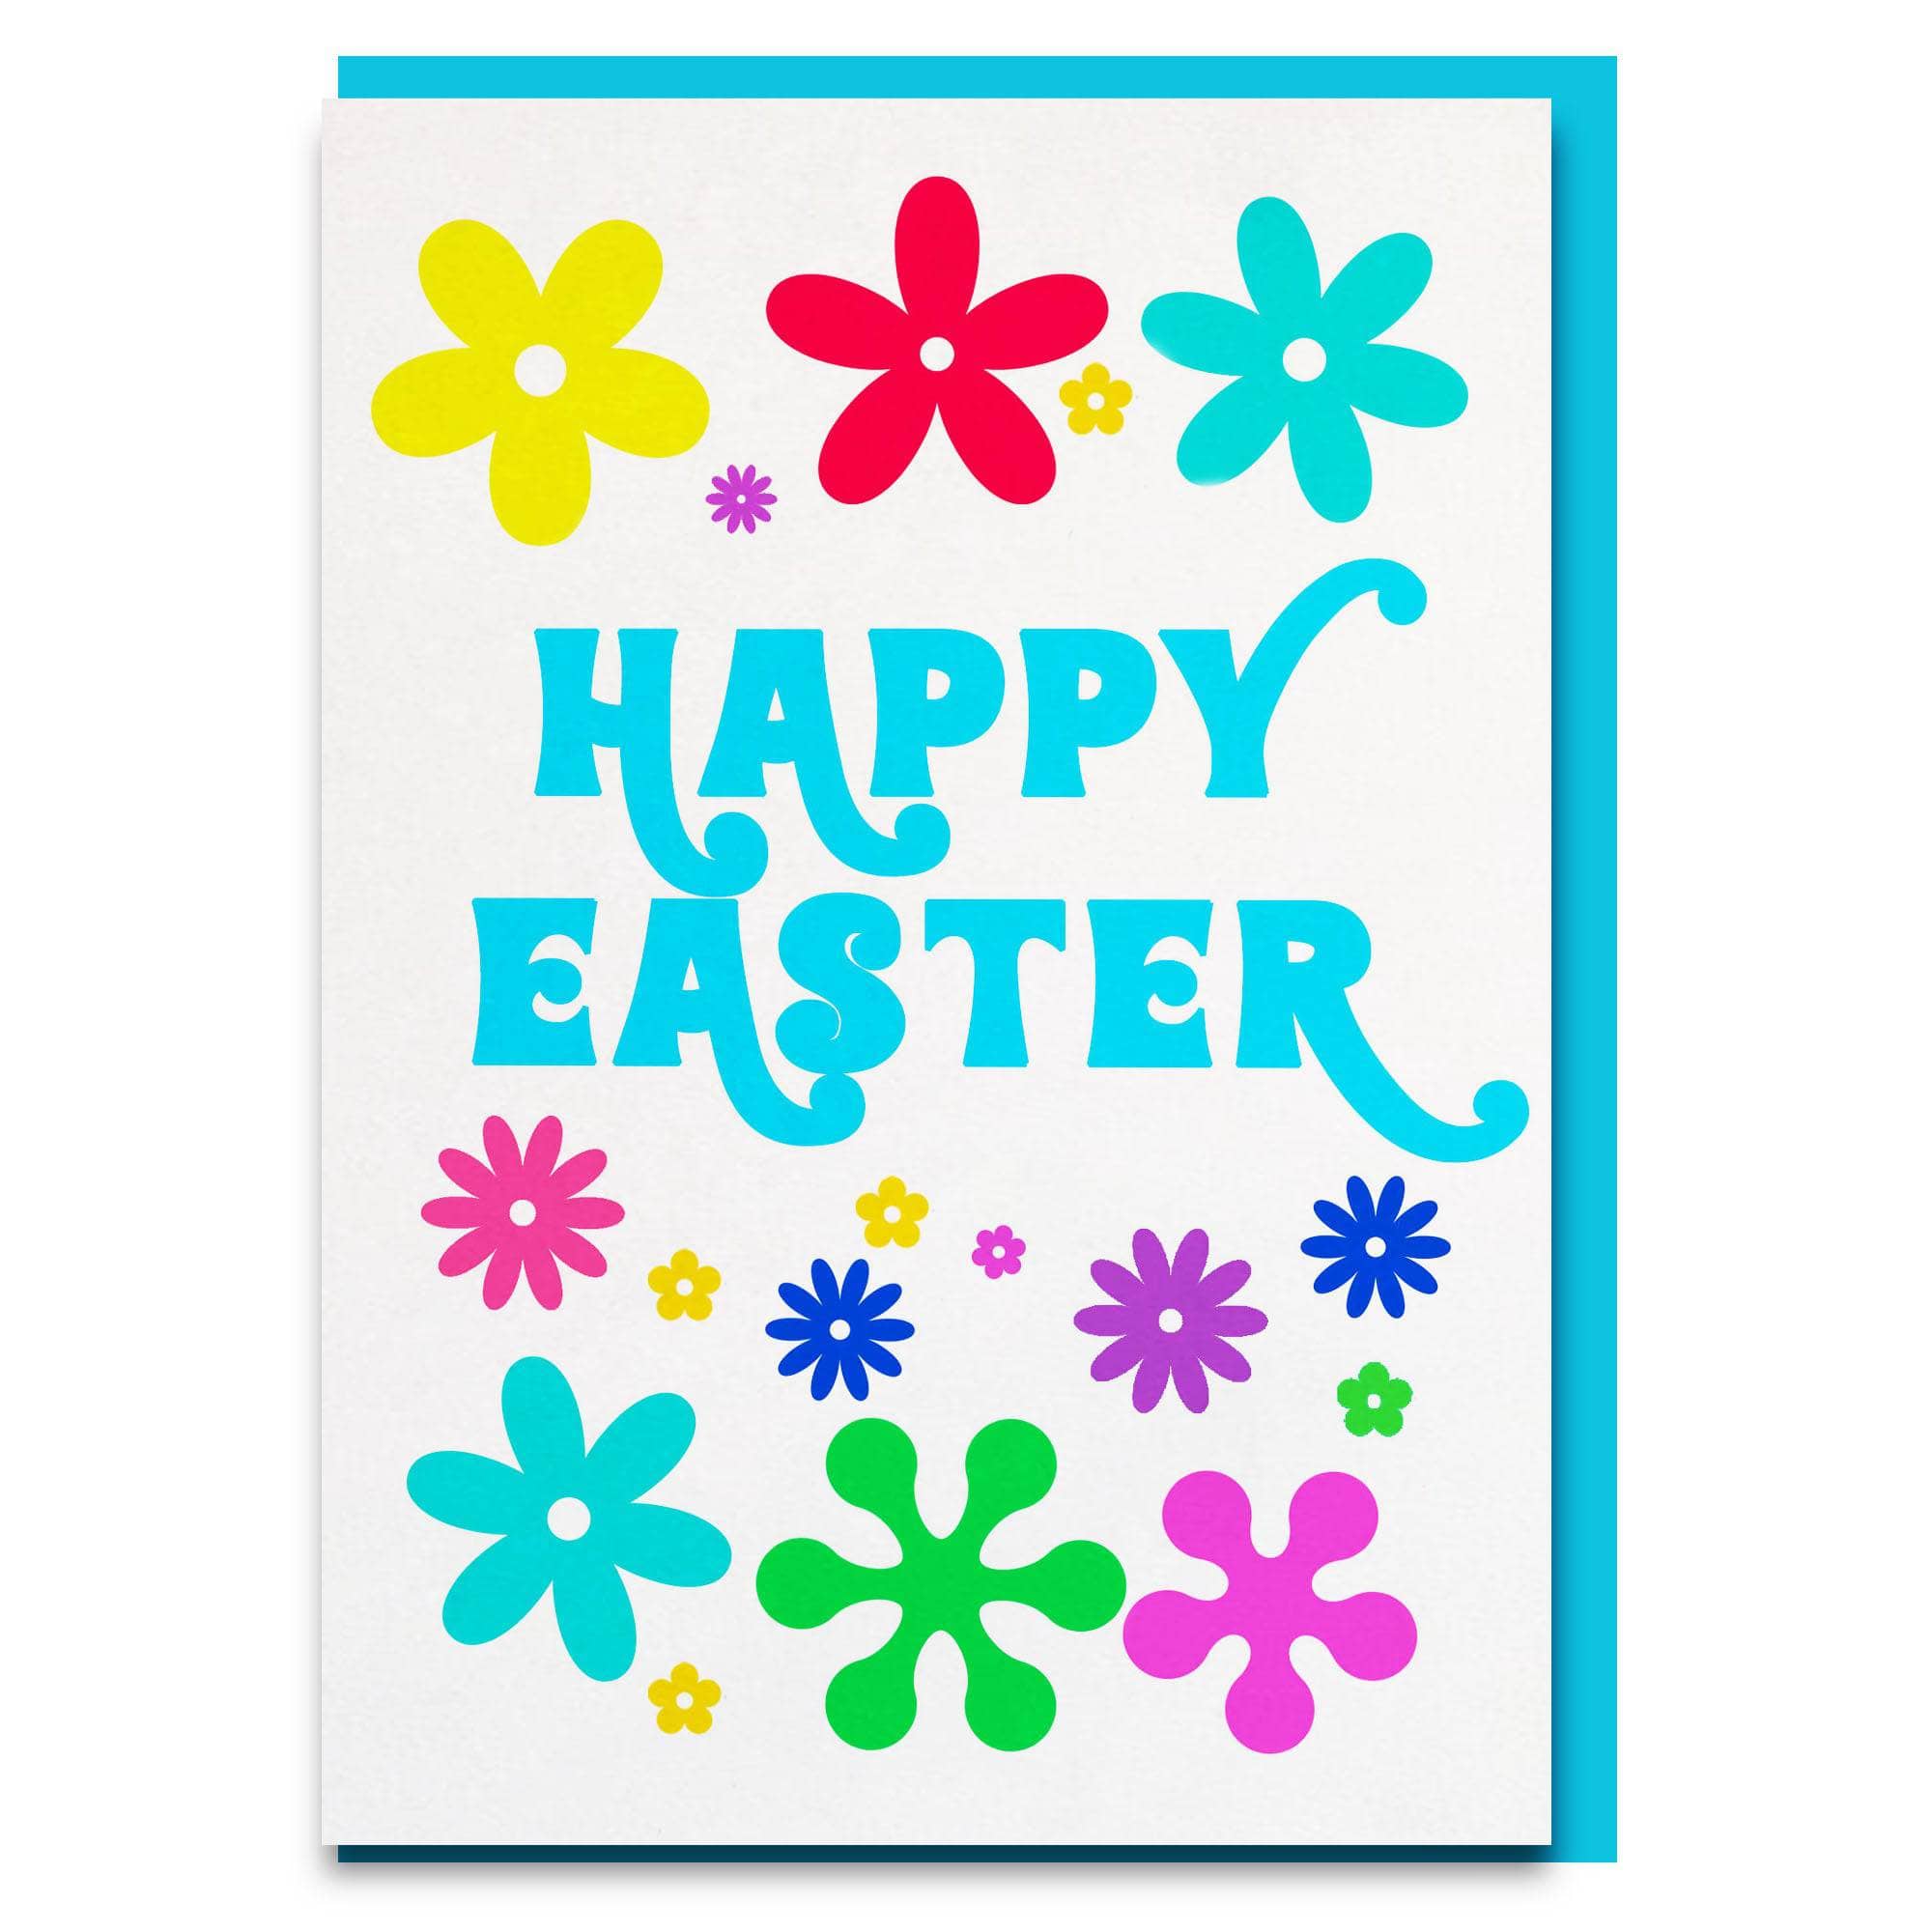 floral happy easter card